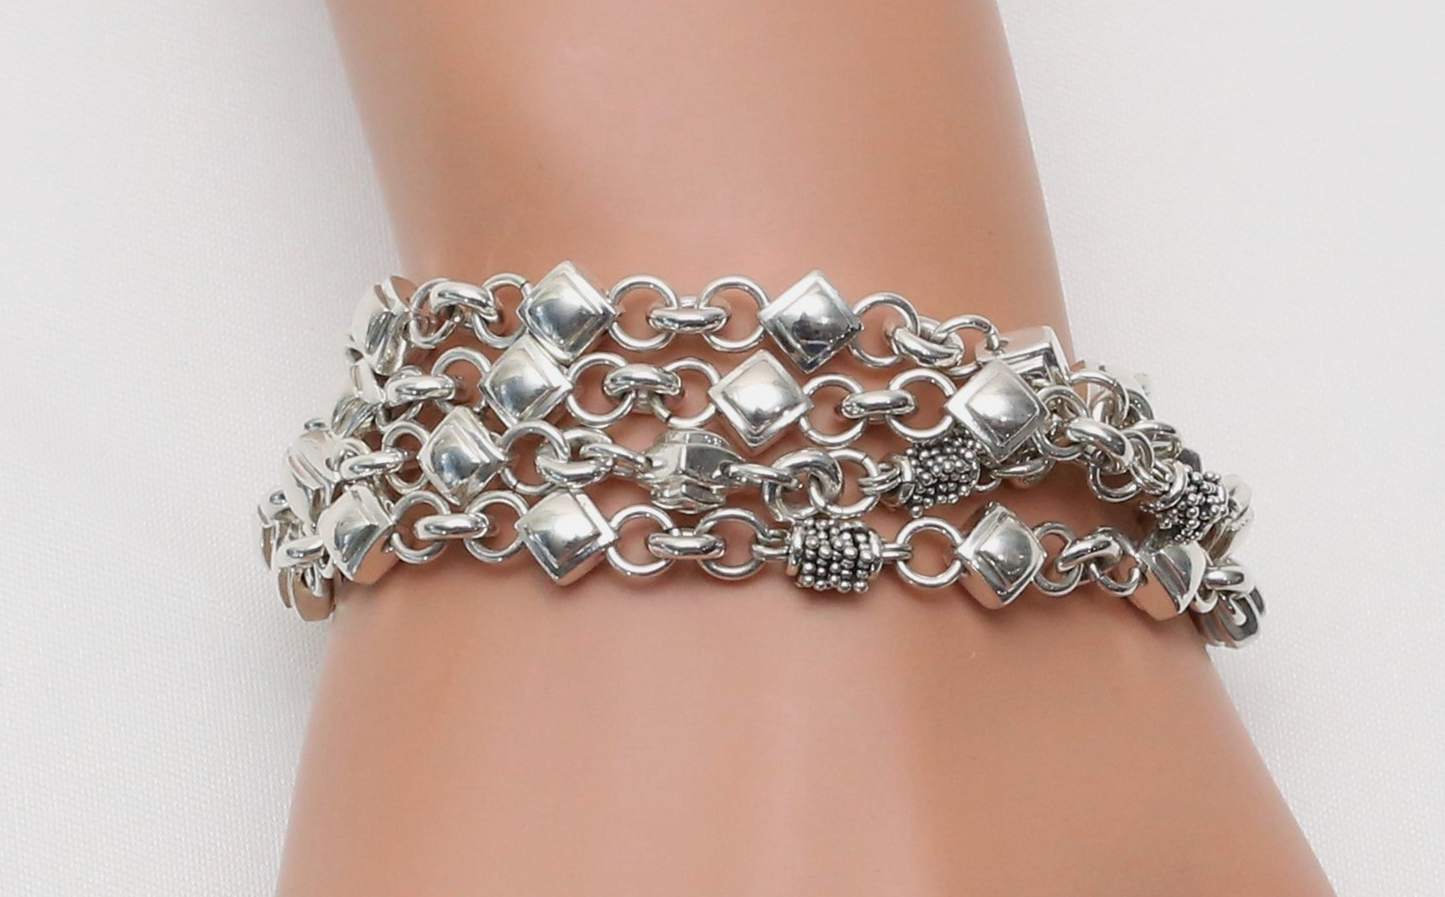 Michael Dawkins Sterling Silver 4-Strand Toggle Bracelet, 8.5 inches - 77.3g